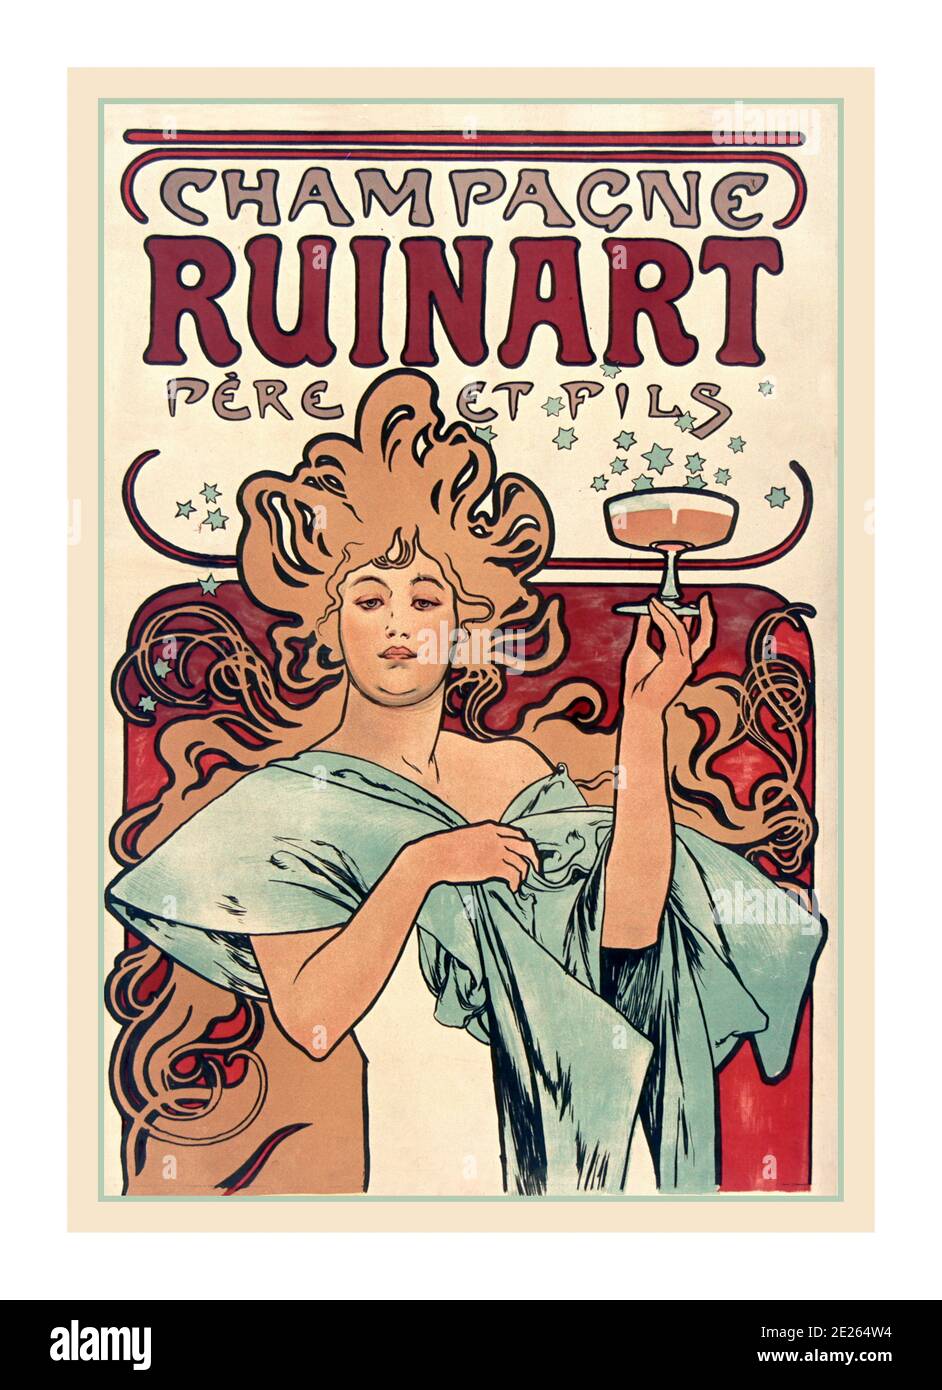 CHAMPAGNE RUINART 1900's Vintage Art Deco poster featuring Ruinart Champagne house, exclusively producing champagne since 1729. Founded by Nicolas Ruinart in the Champagne region in  city of Reims France CHAMPAGNE RUINART Vintage art Poster 1900’s Stock Photo